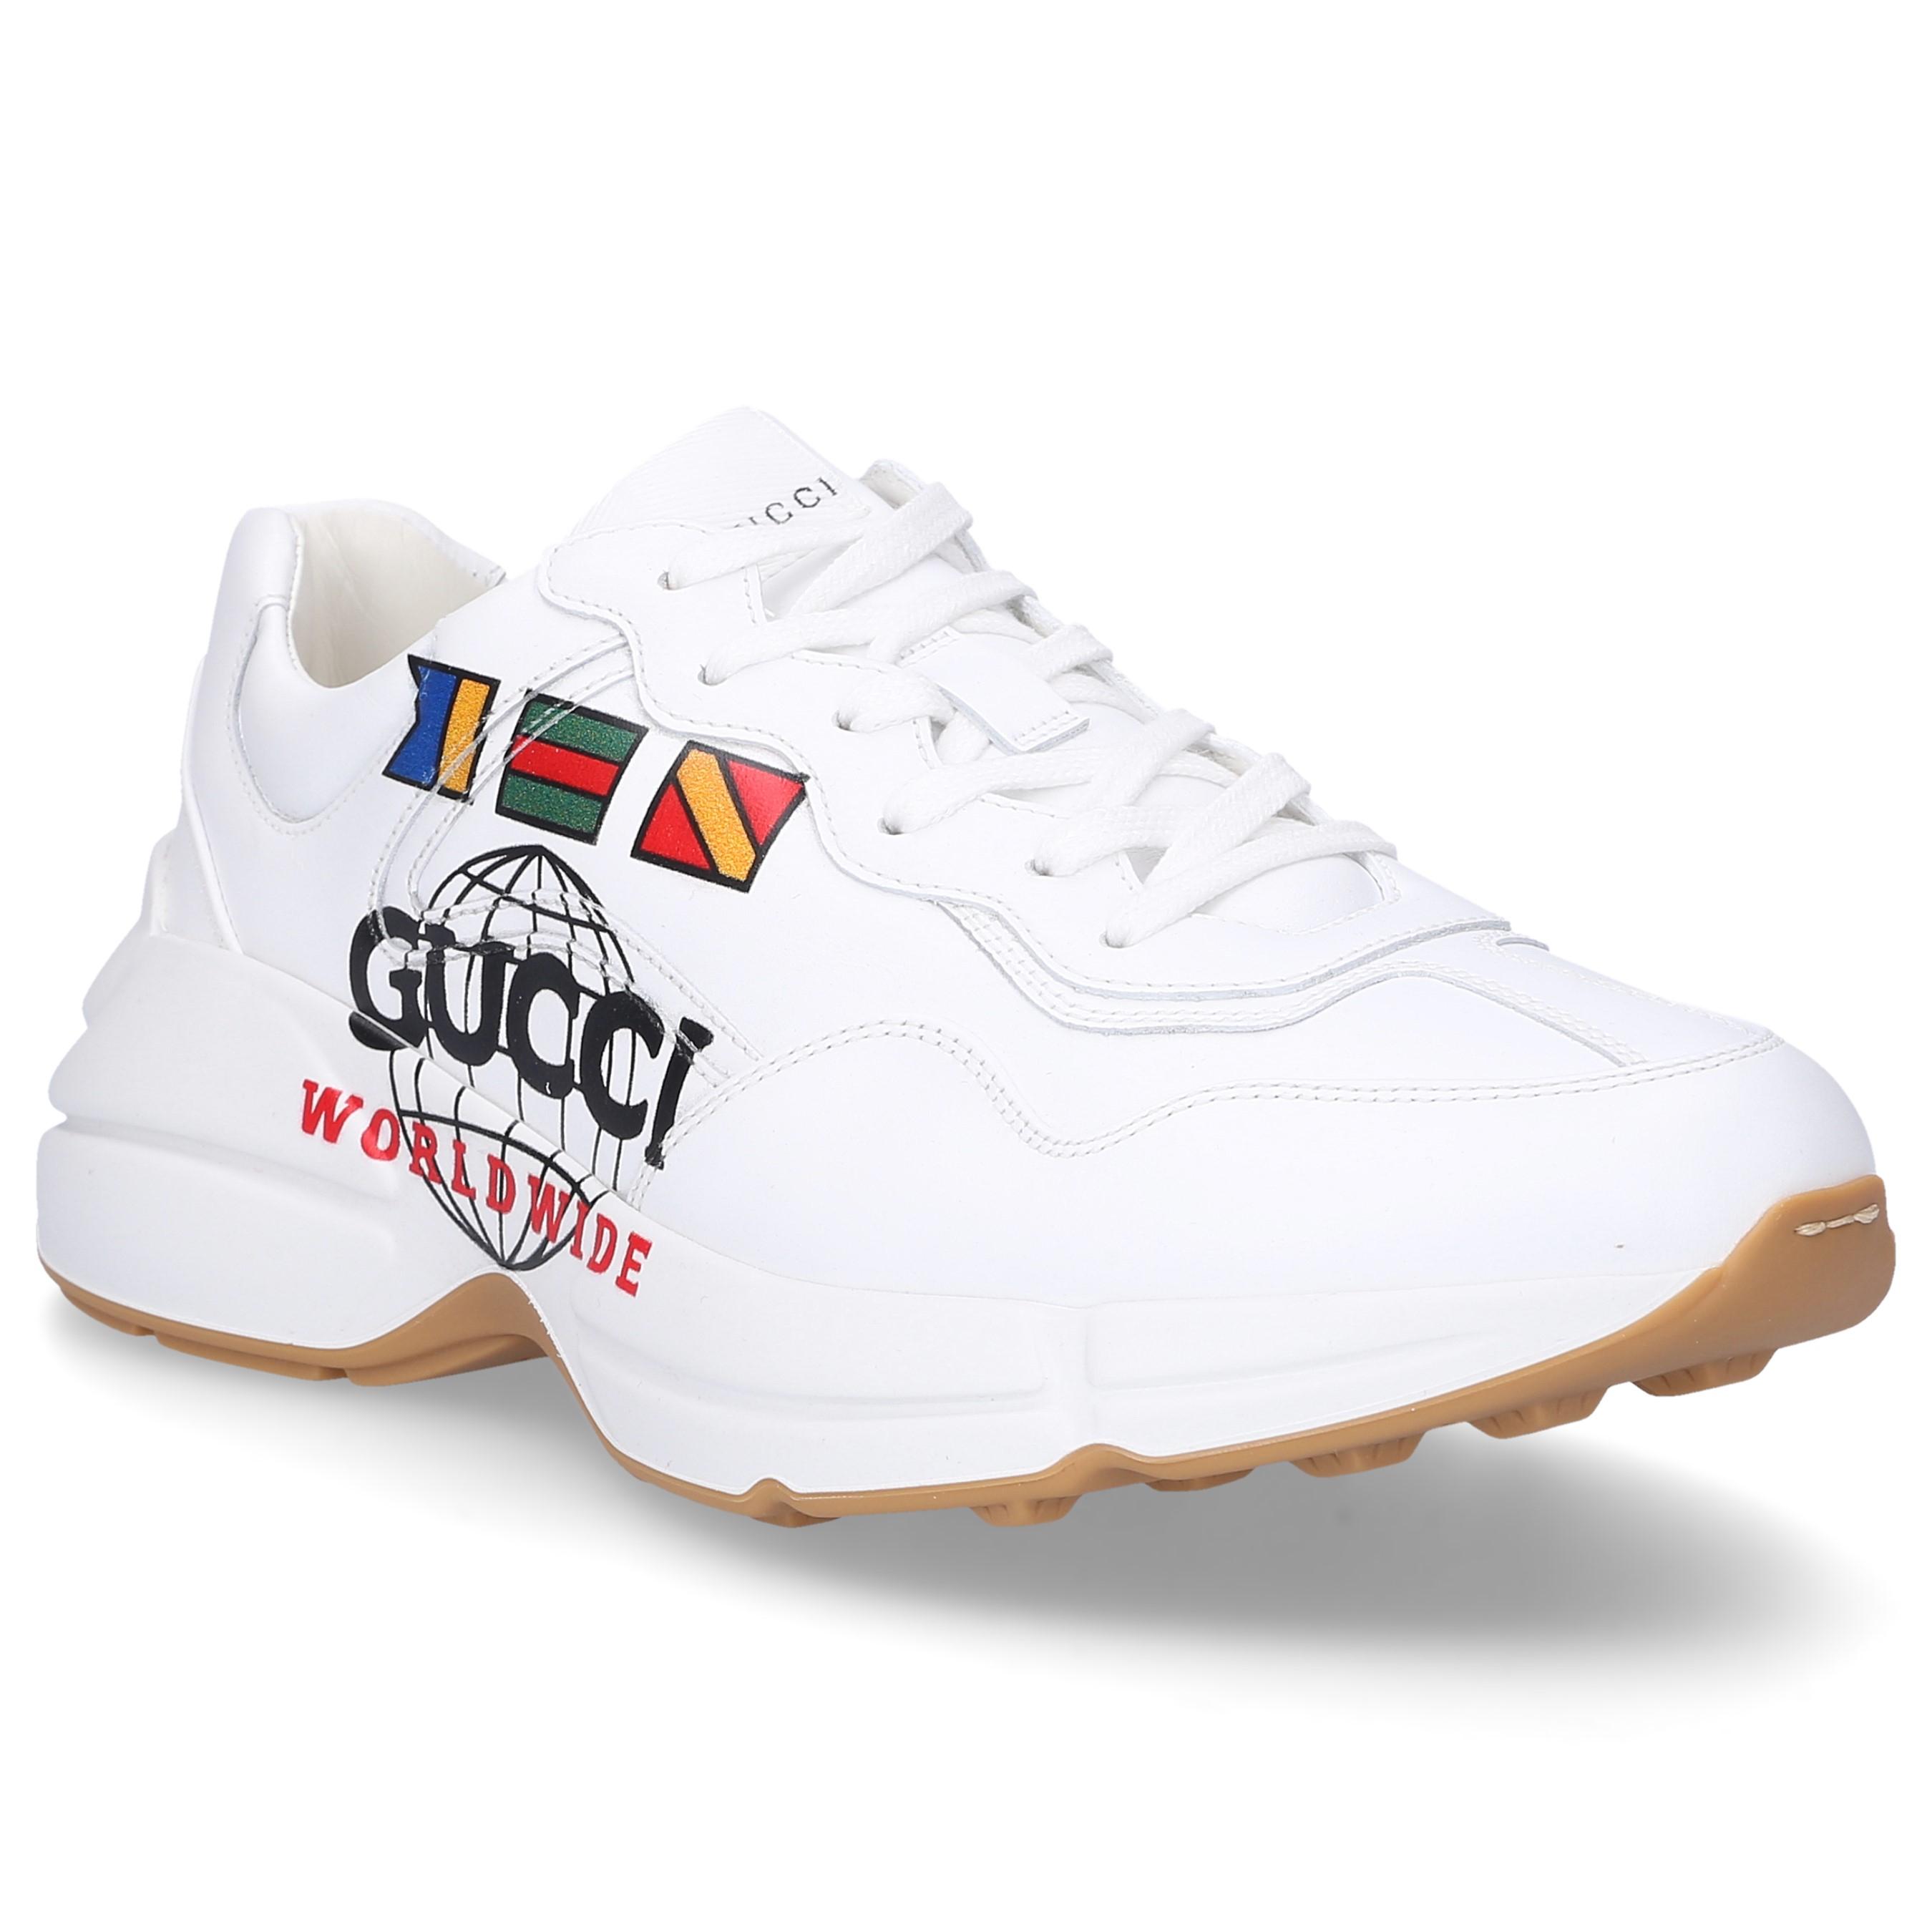 Gucci Leather Sneakers White Rhyton for Men - Lyst